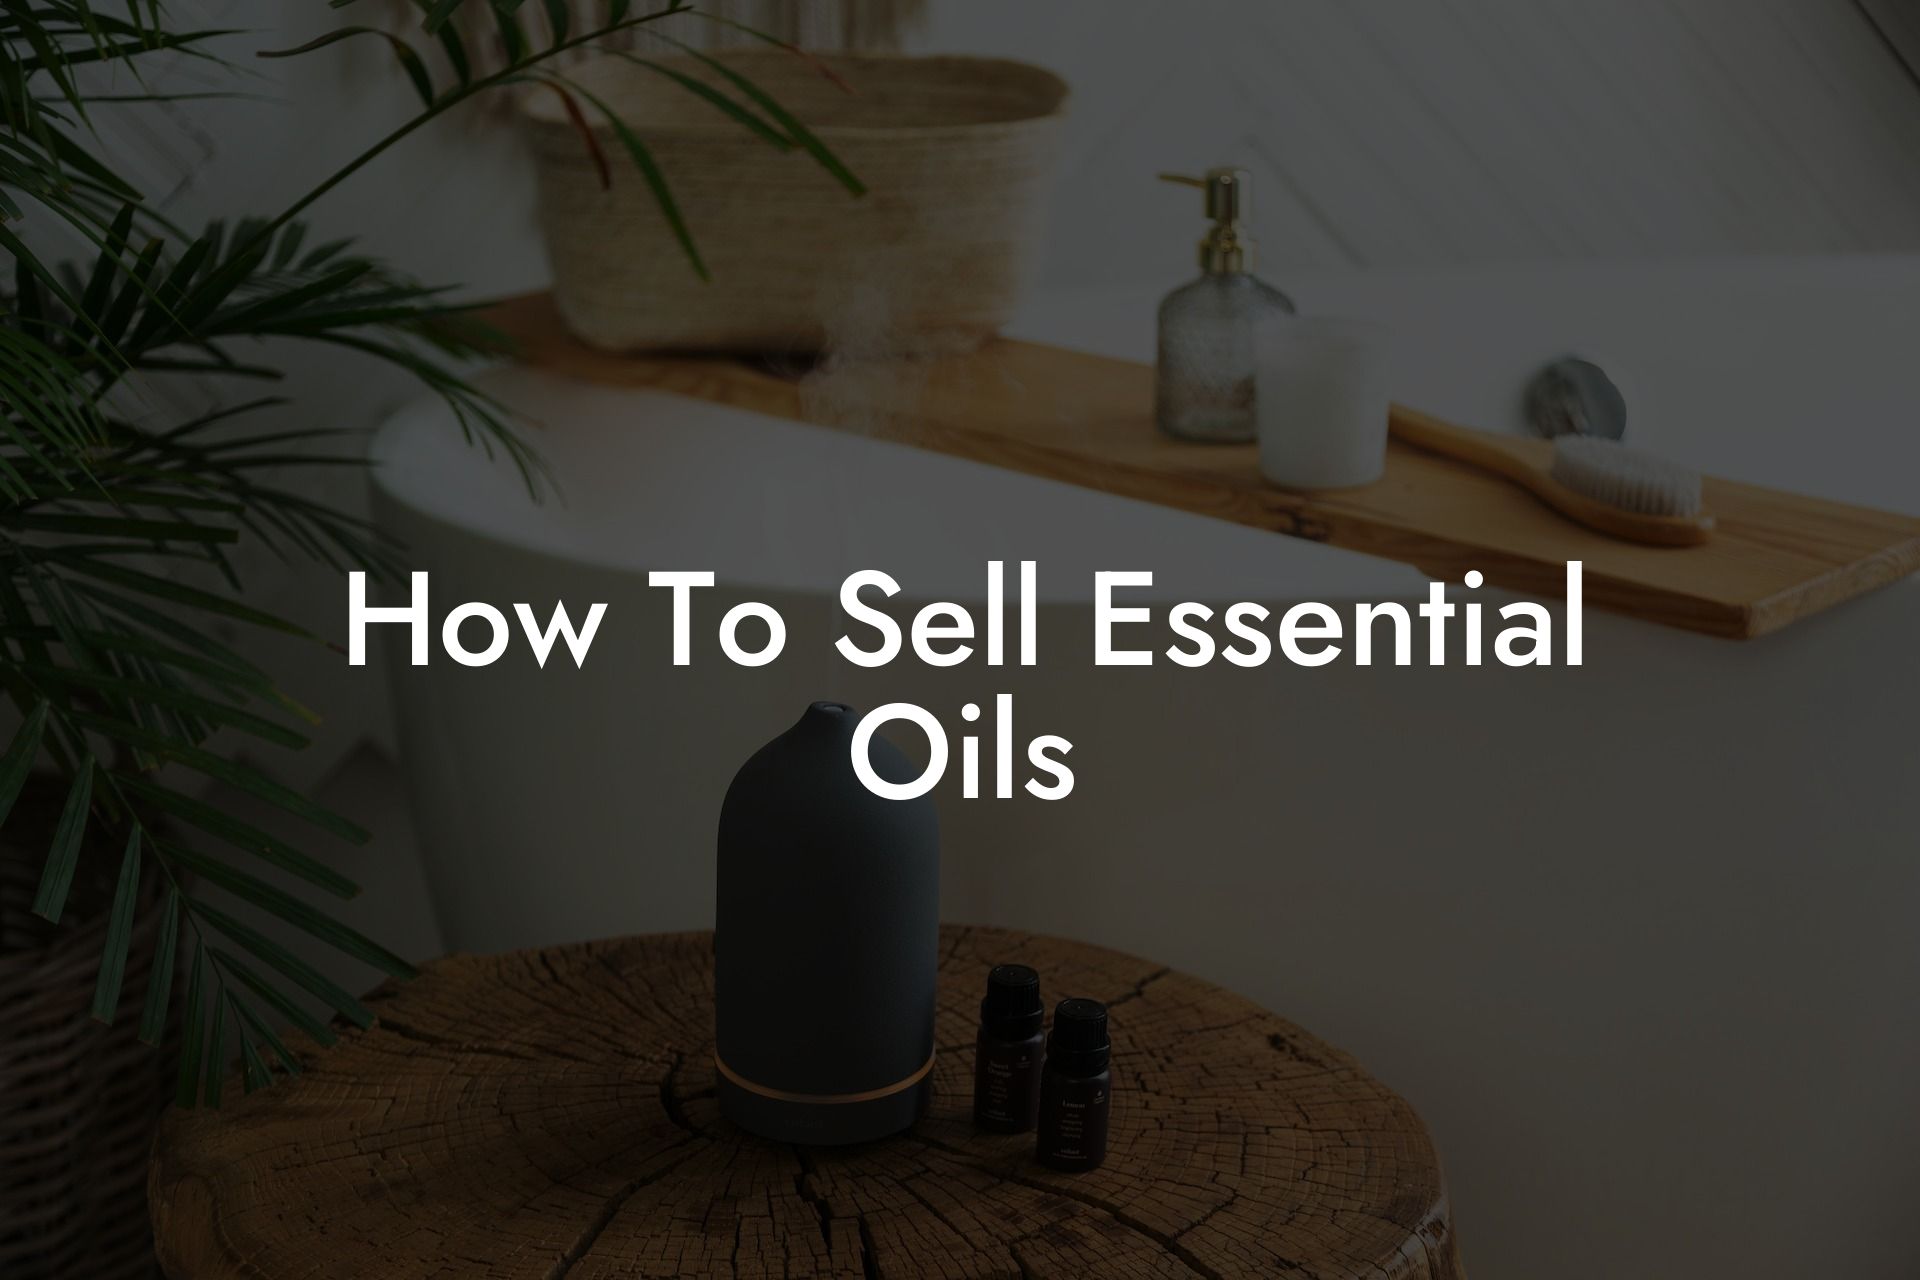 How To Sell Essential Oils